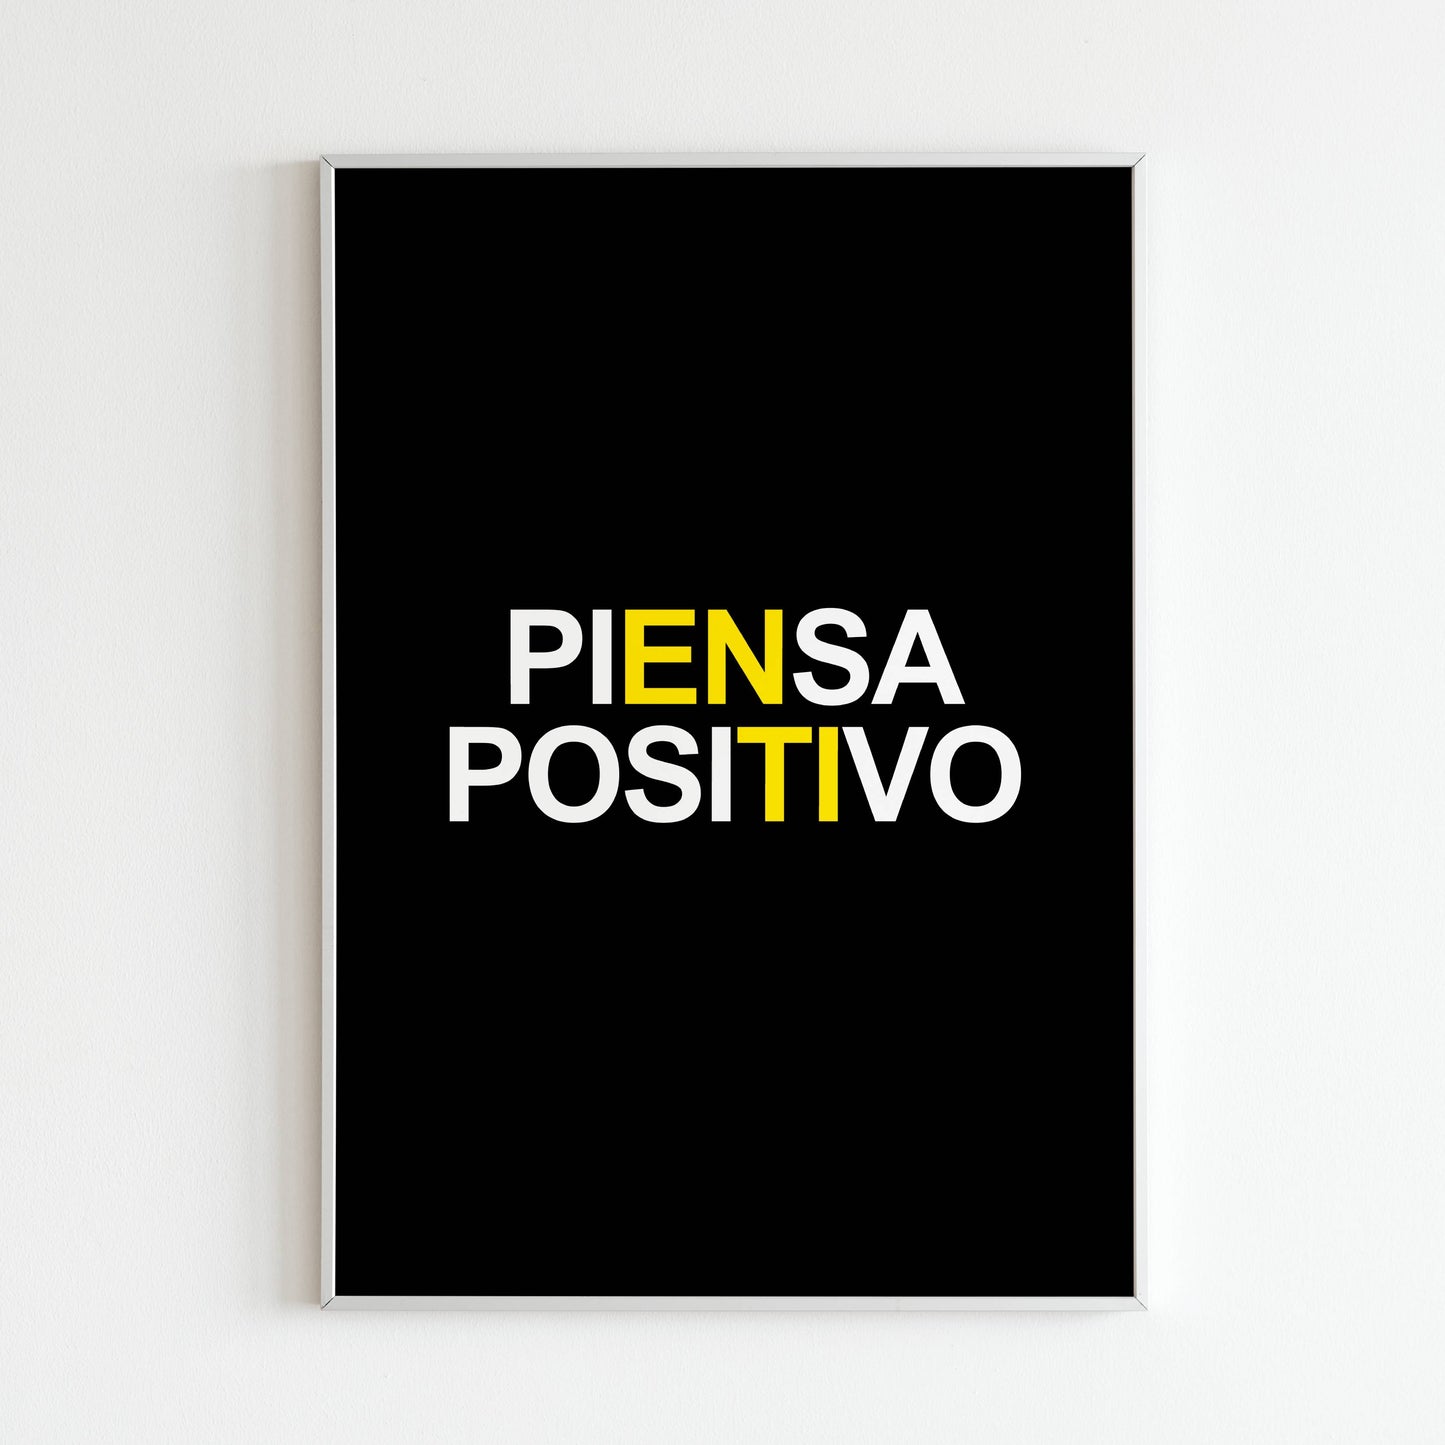 Downloadable "Piensa positivo" wall art for a positive mindset message (in Spanish).